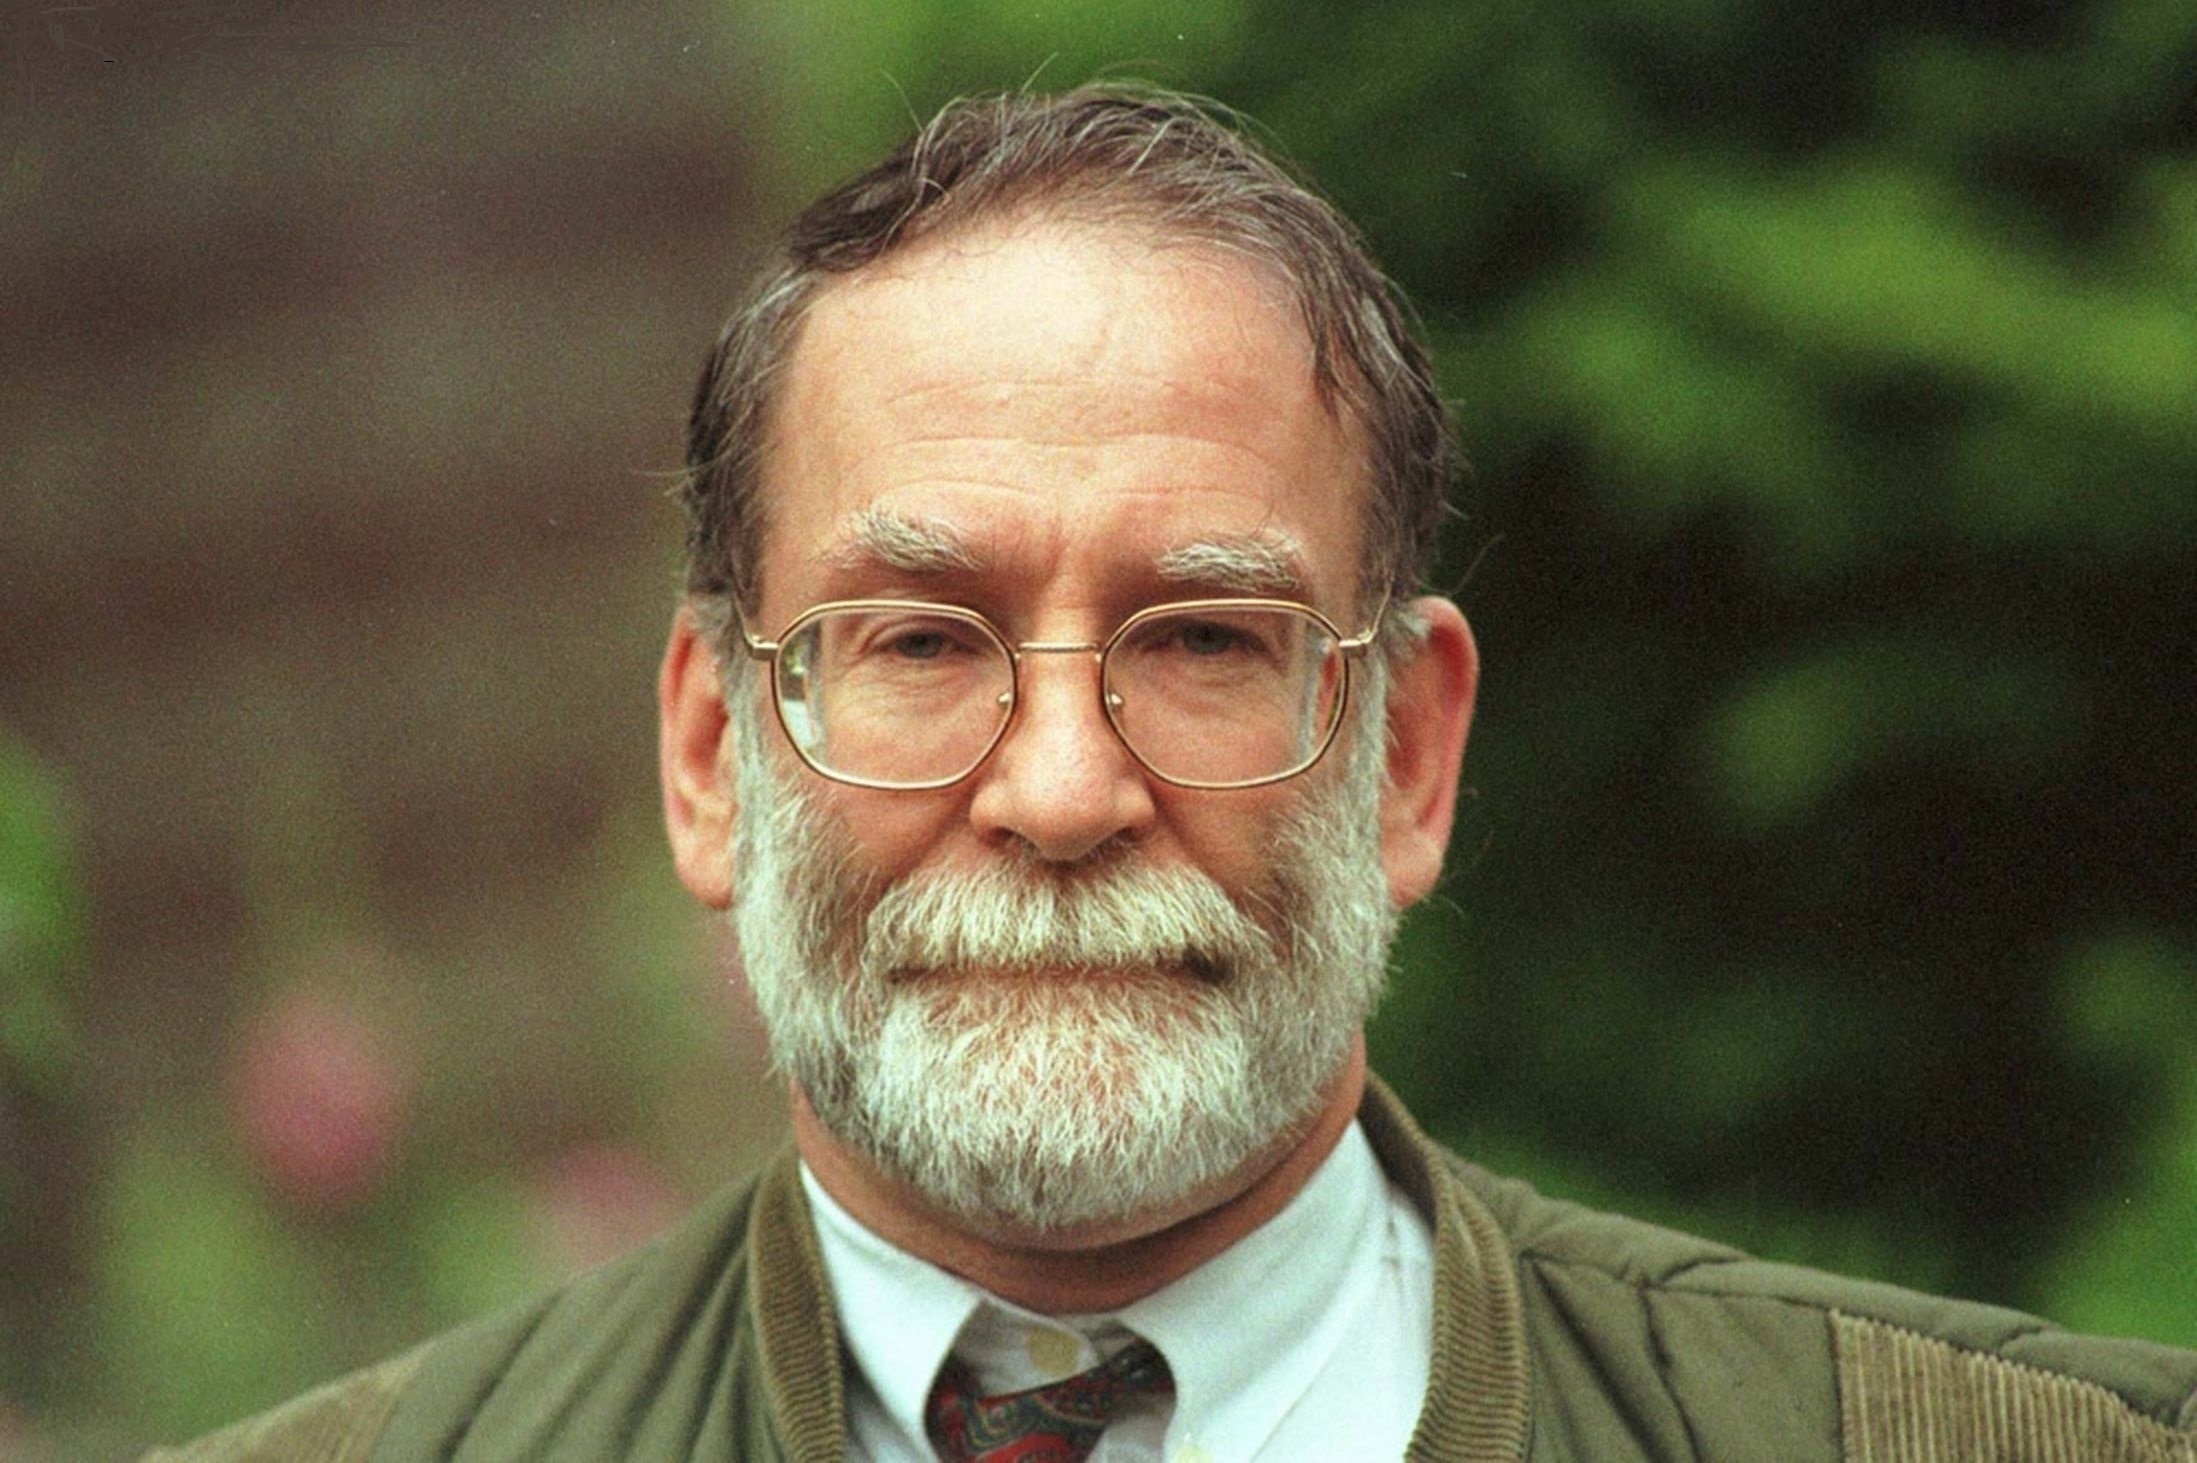 Lethal Dose of Morphine / Harold Shipman Know Your Meme